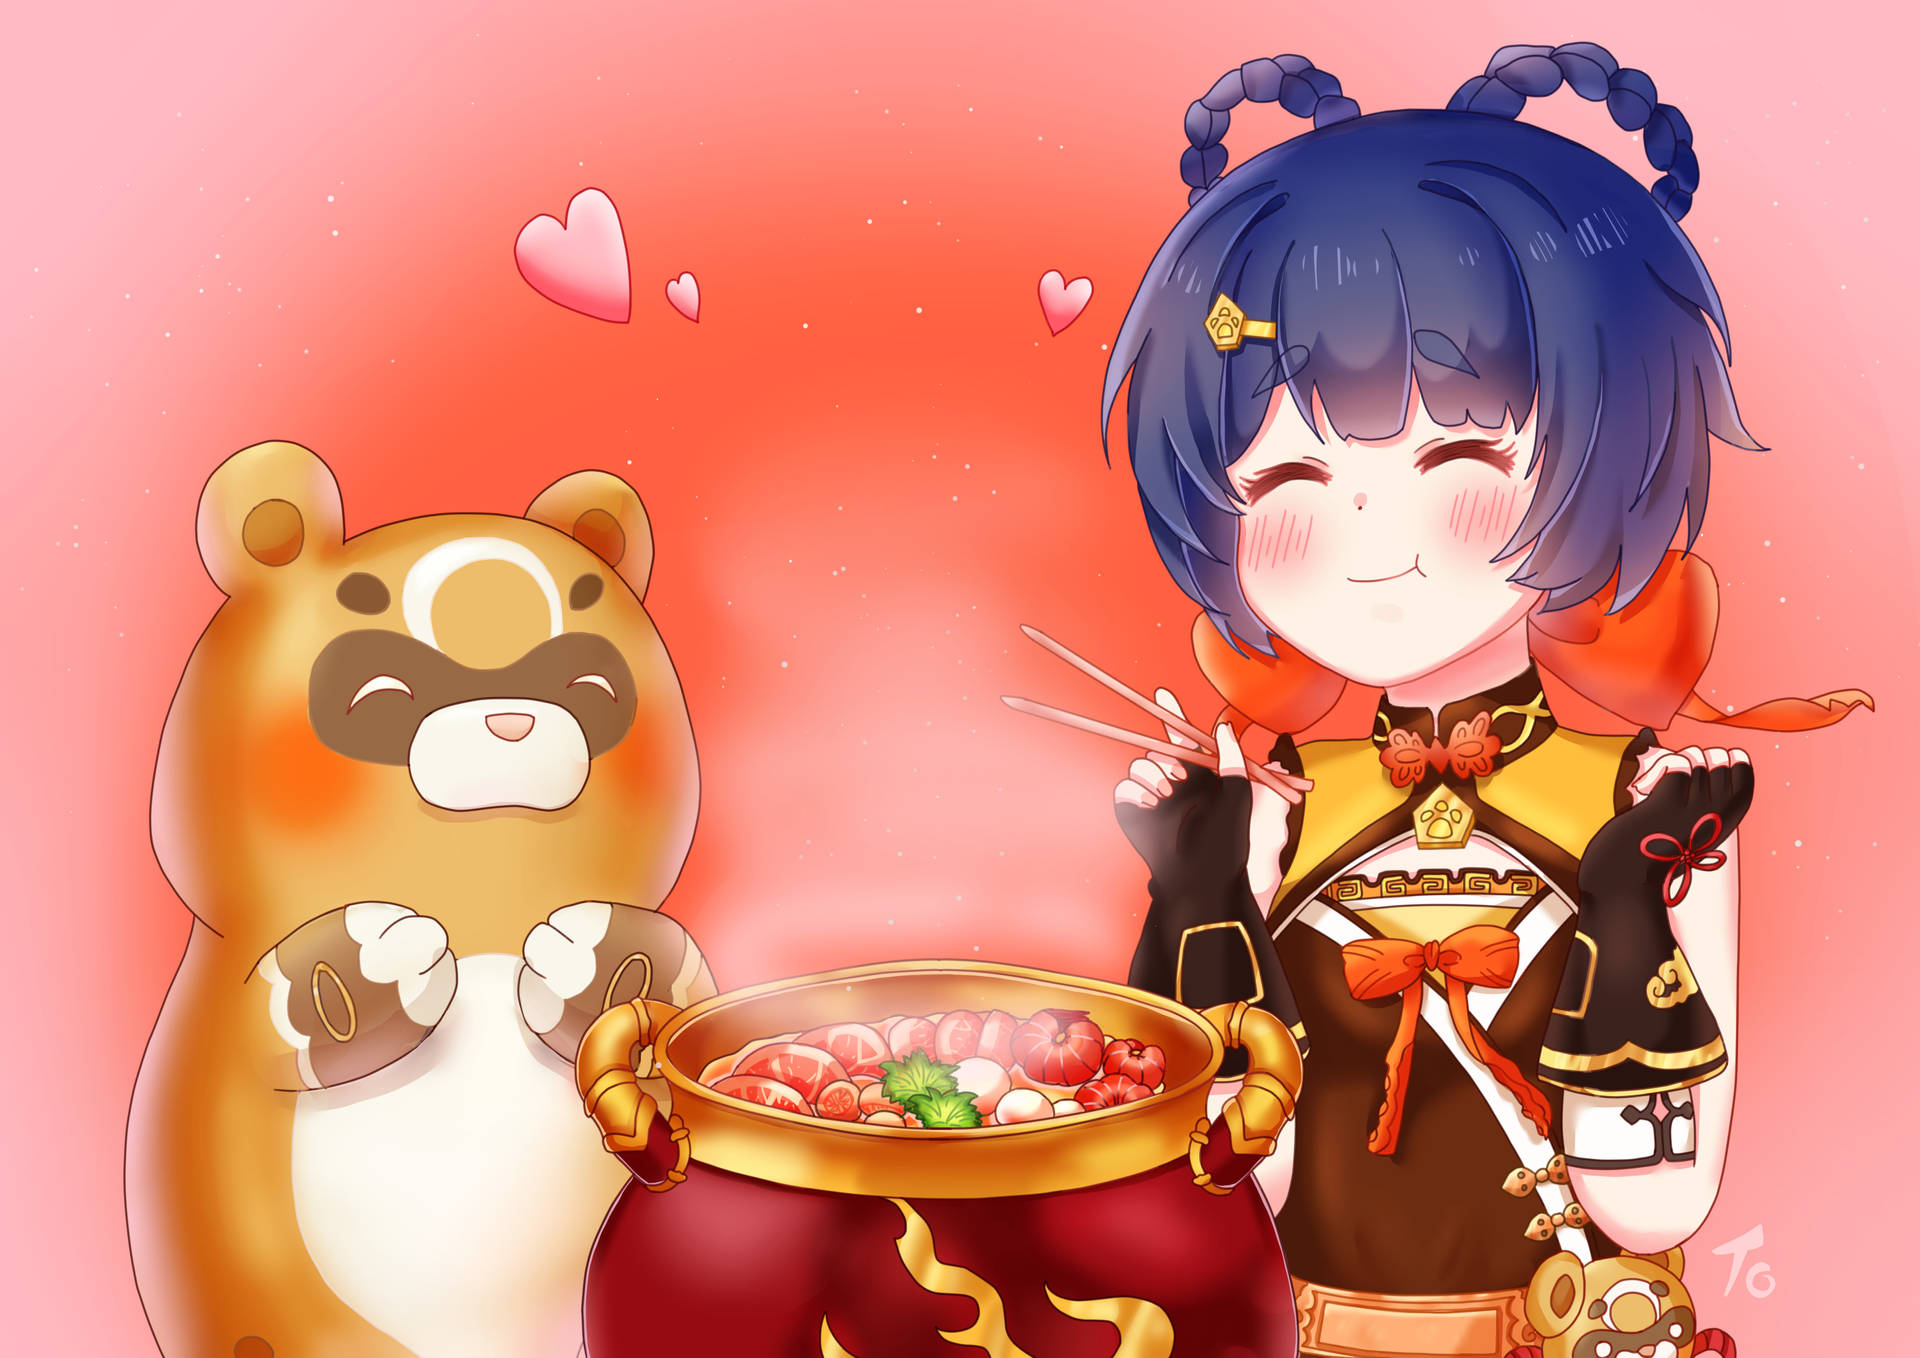 Xiangling And Her Bear Friend Background